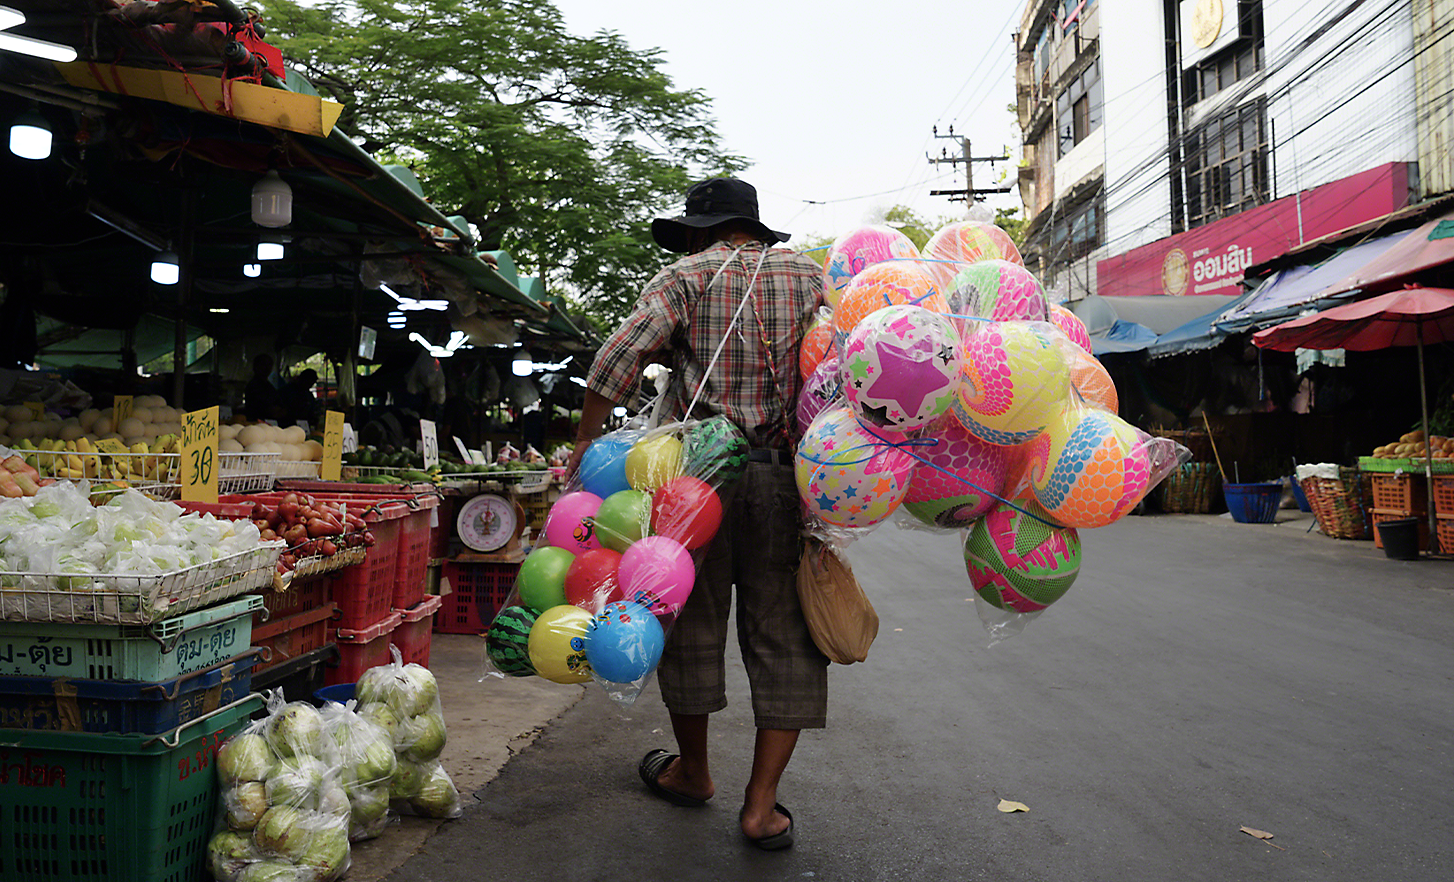 A street vendor carrying large bags of brightly coloured plastic balls